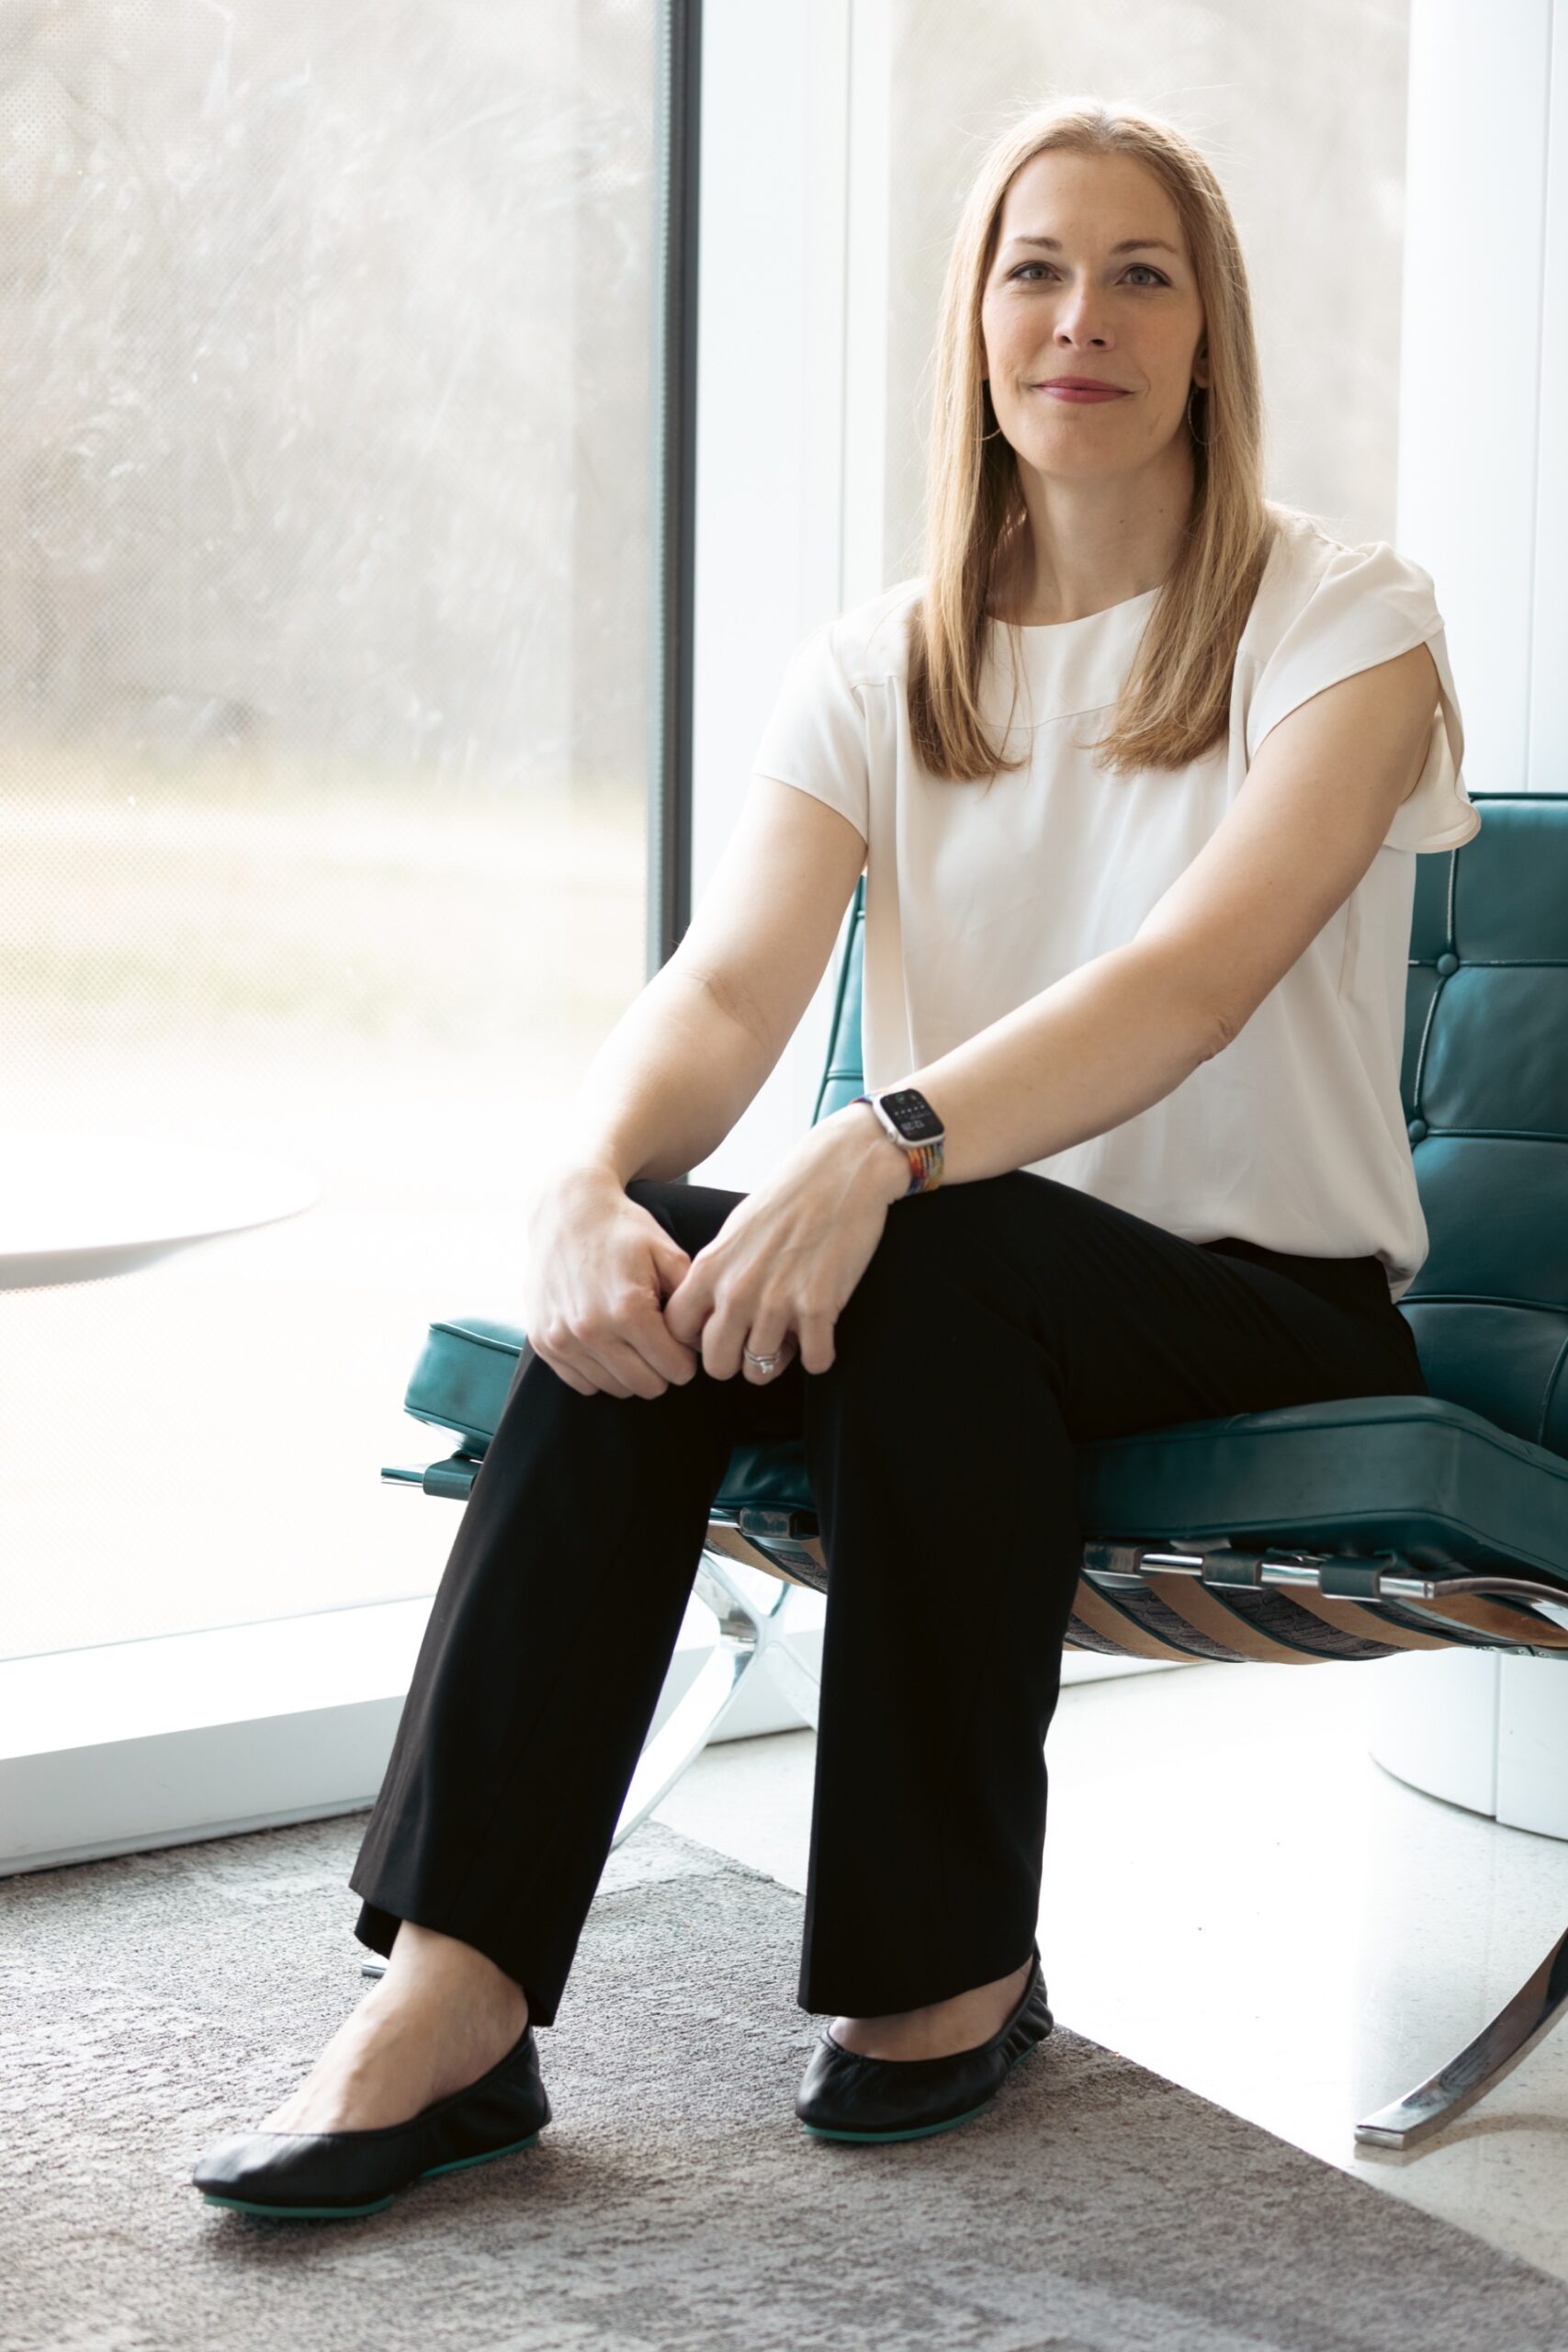 A woman with medium-blonde hair wears a white blouse and black slacks while sitting in a sunny office space.